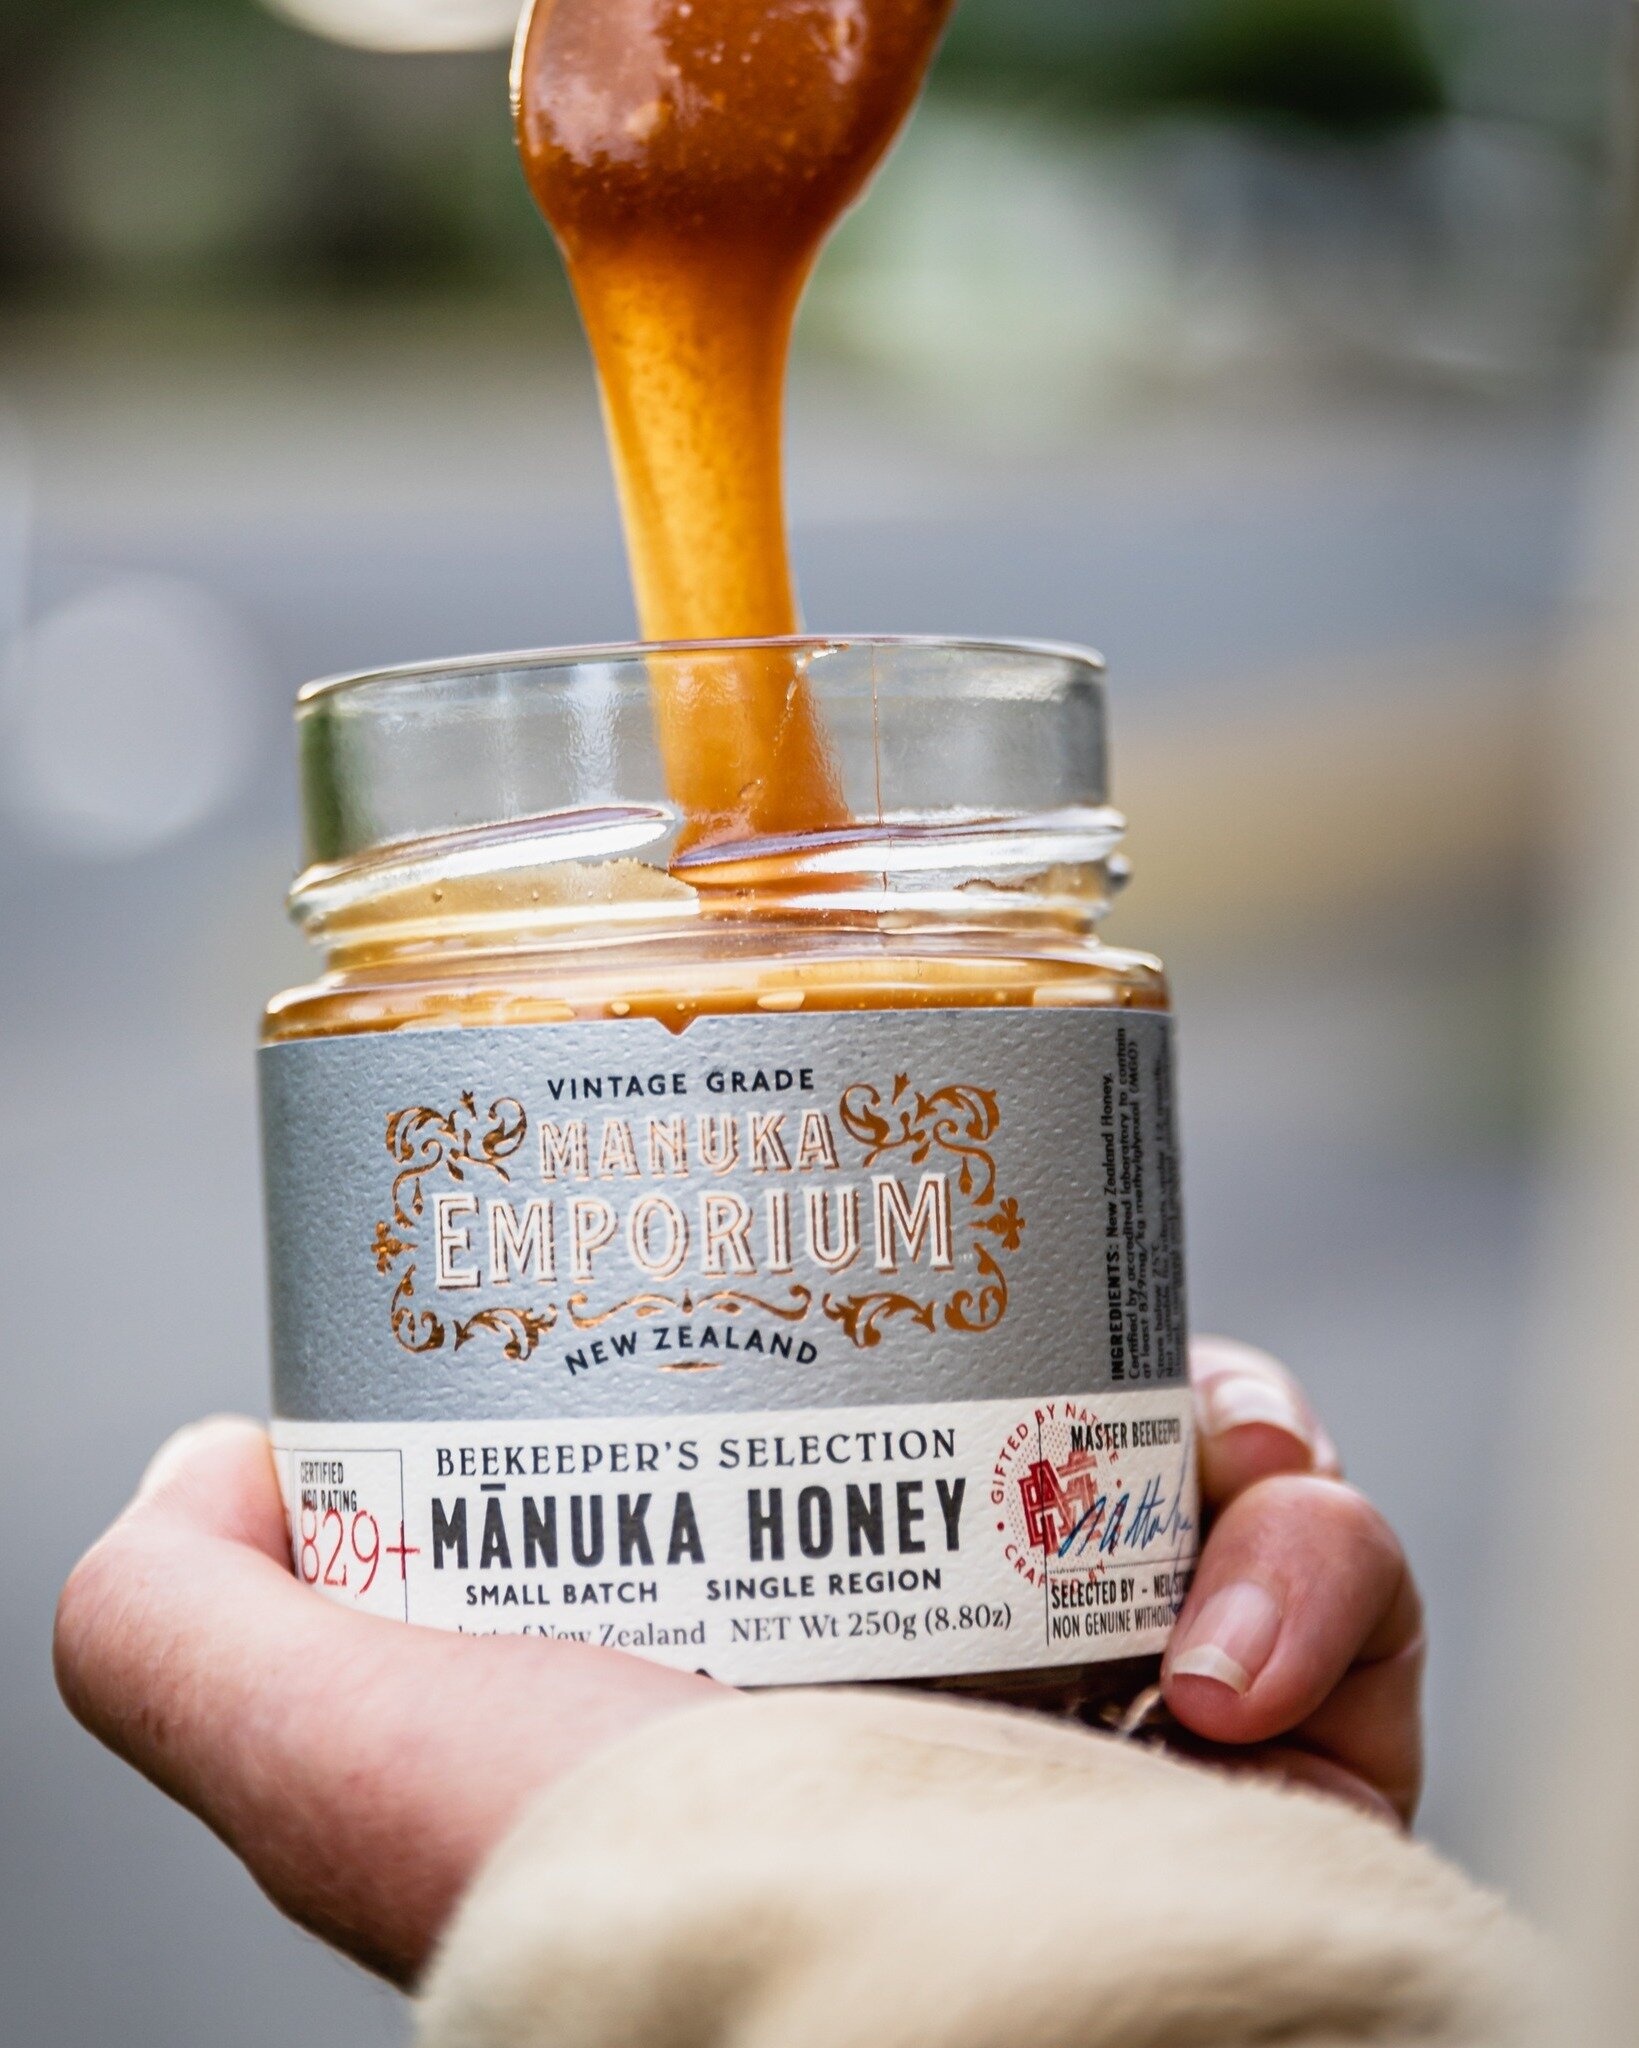 Indulge in a spoonful of Extra High Potency Manuka for the ultimate health boost, now conveniently available in snap packets for on-the-go wellness! Link in bio

#manukaemporium 
#mānukahoney 
#DailyWellness